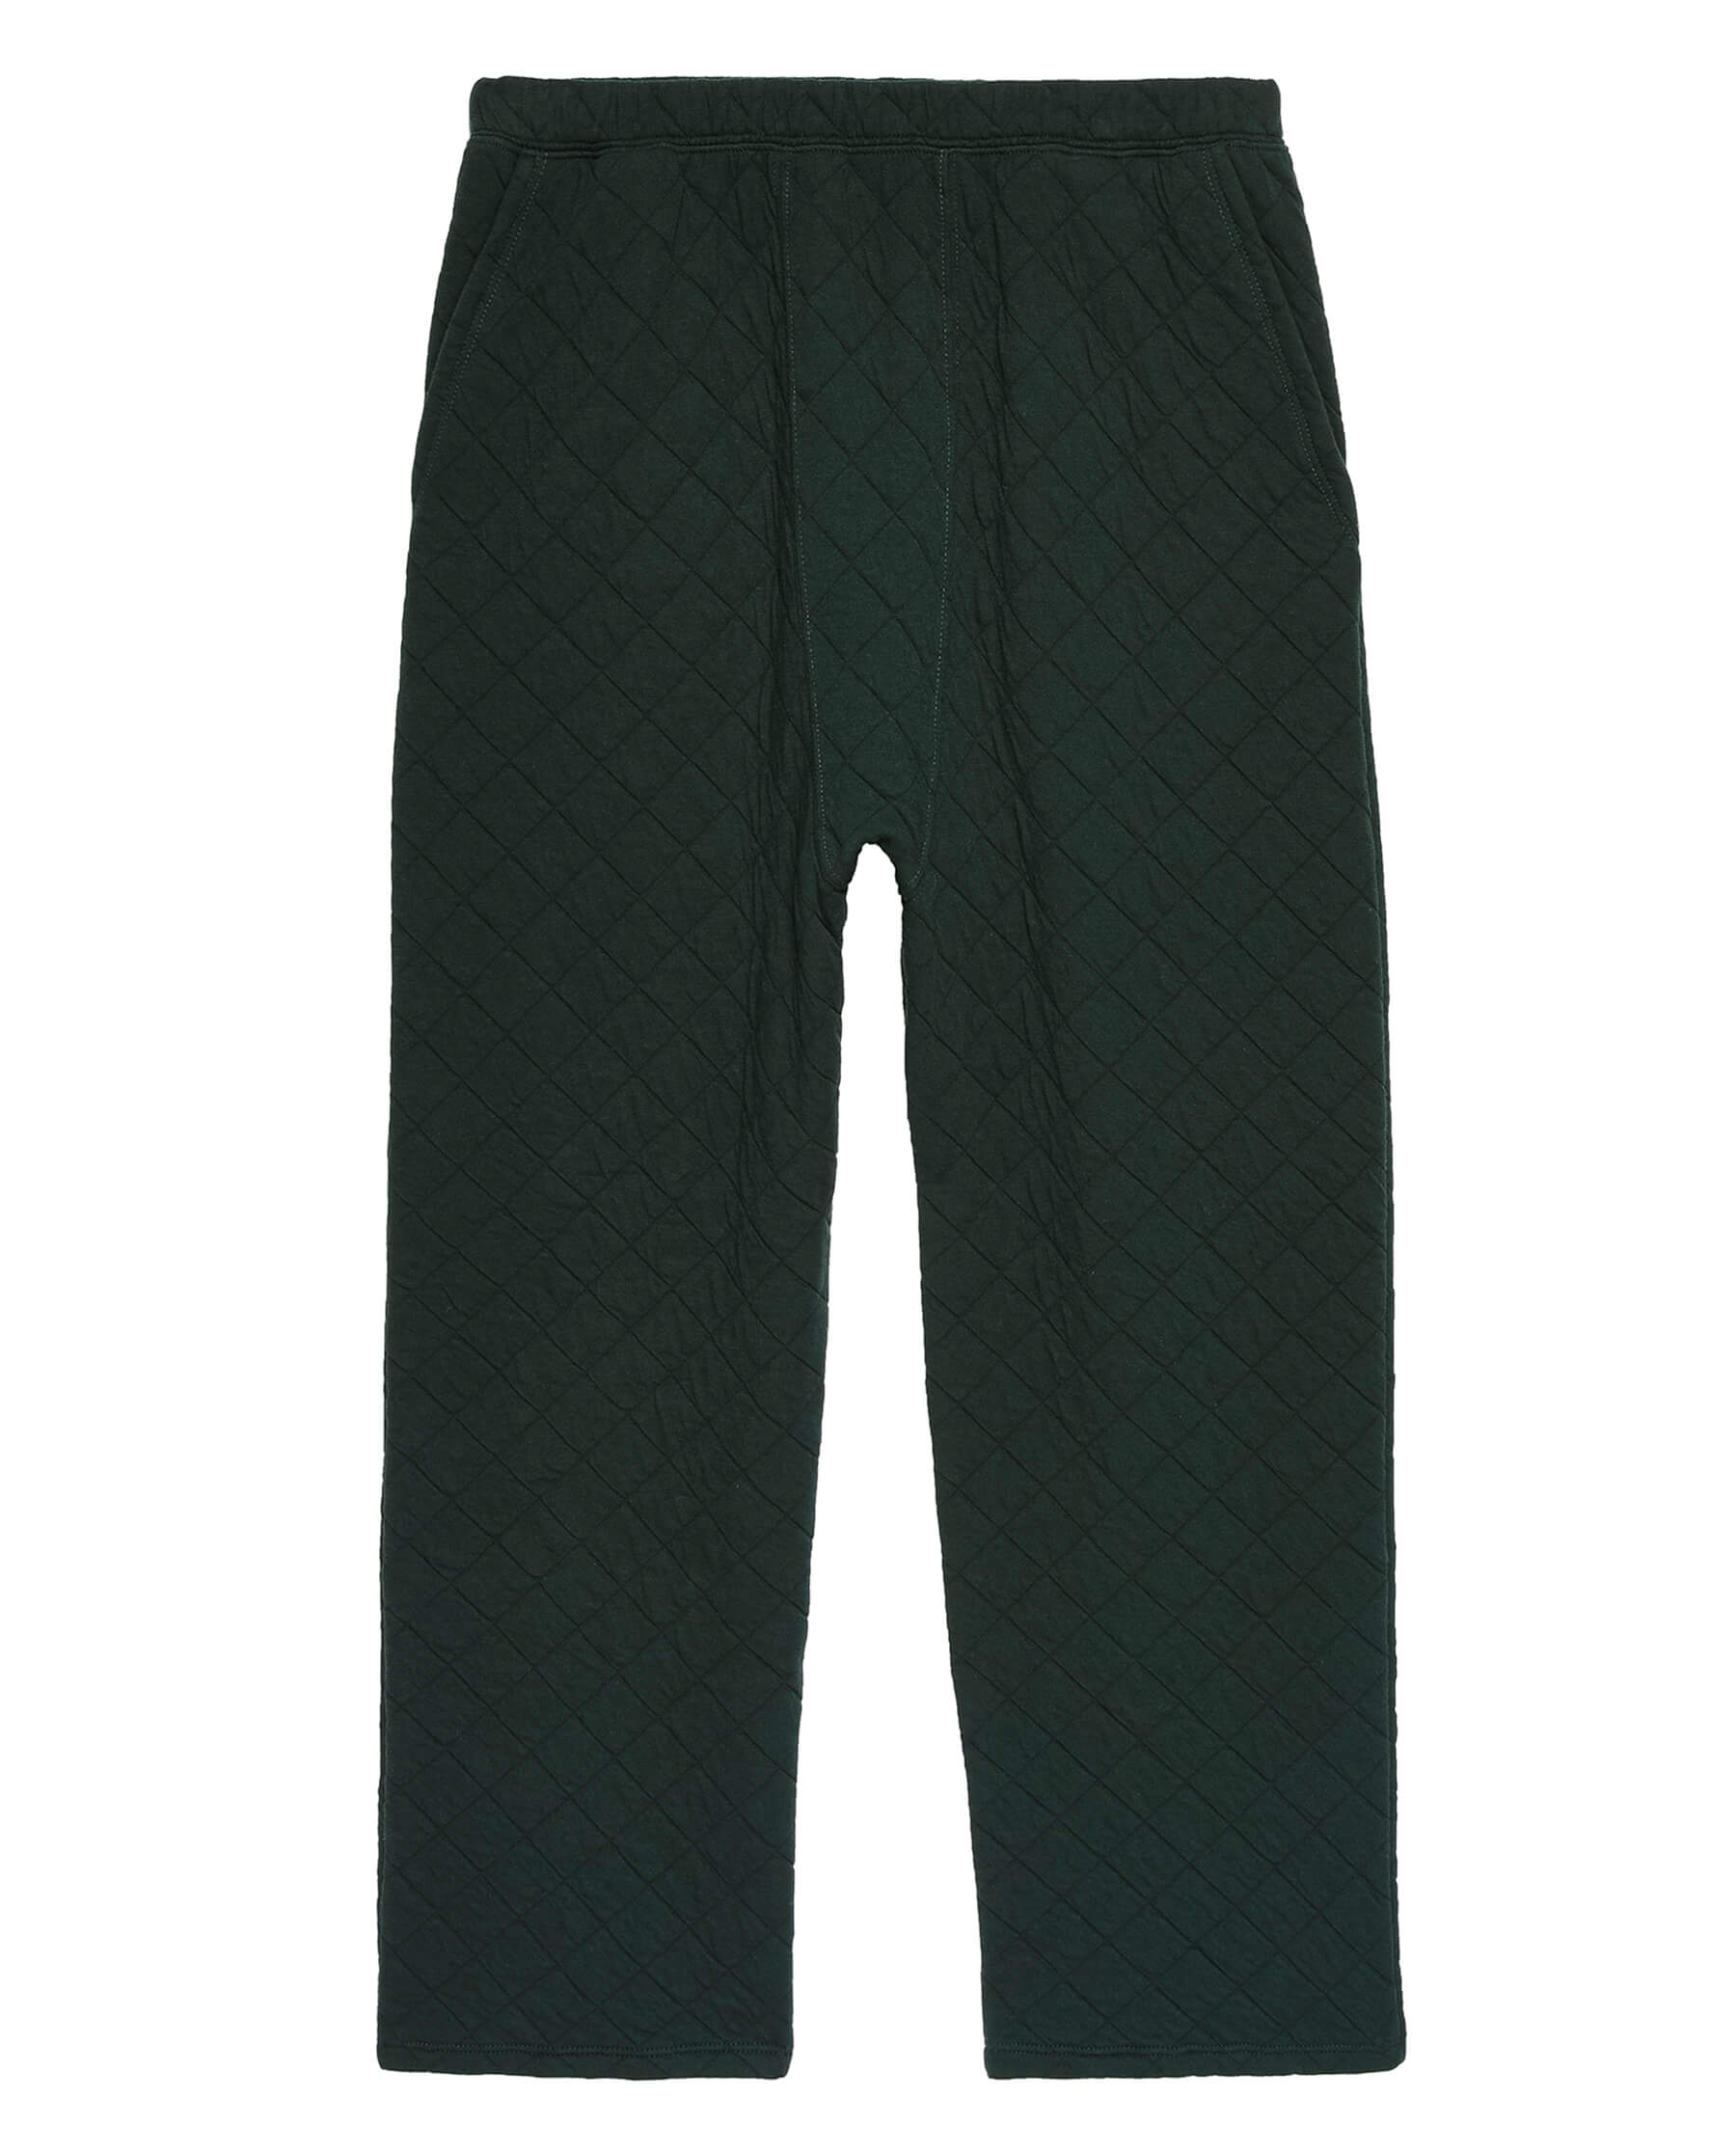 The Quilted Pajama Pant. -- Pine